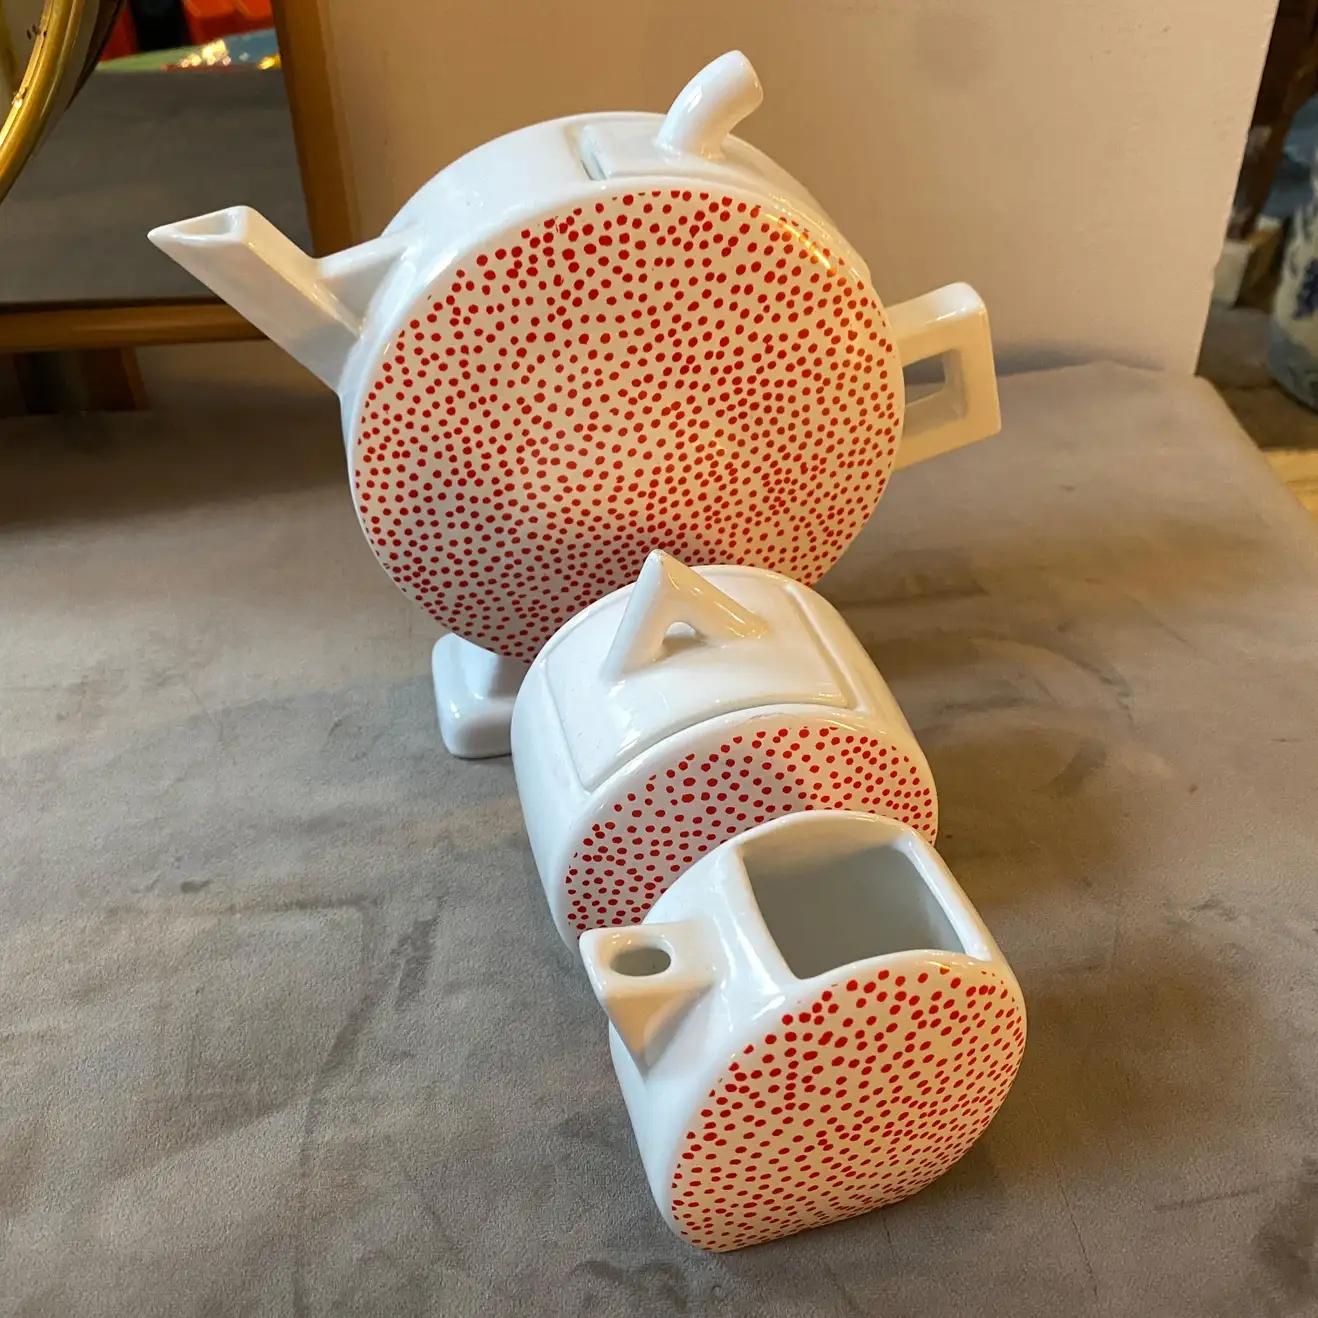 An amazing Memphis Milano tea set manufactured in Italy by Mas Italia. the red and white ceramic it's in perfect condition, the set has not been probably never used. The tea set by MAS is a striking example of the bold and avant-garde design